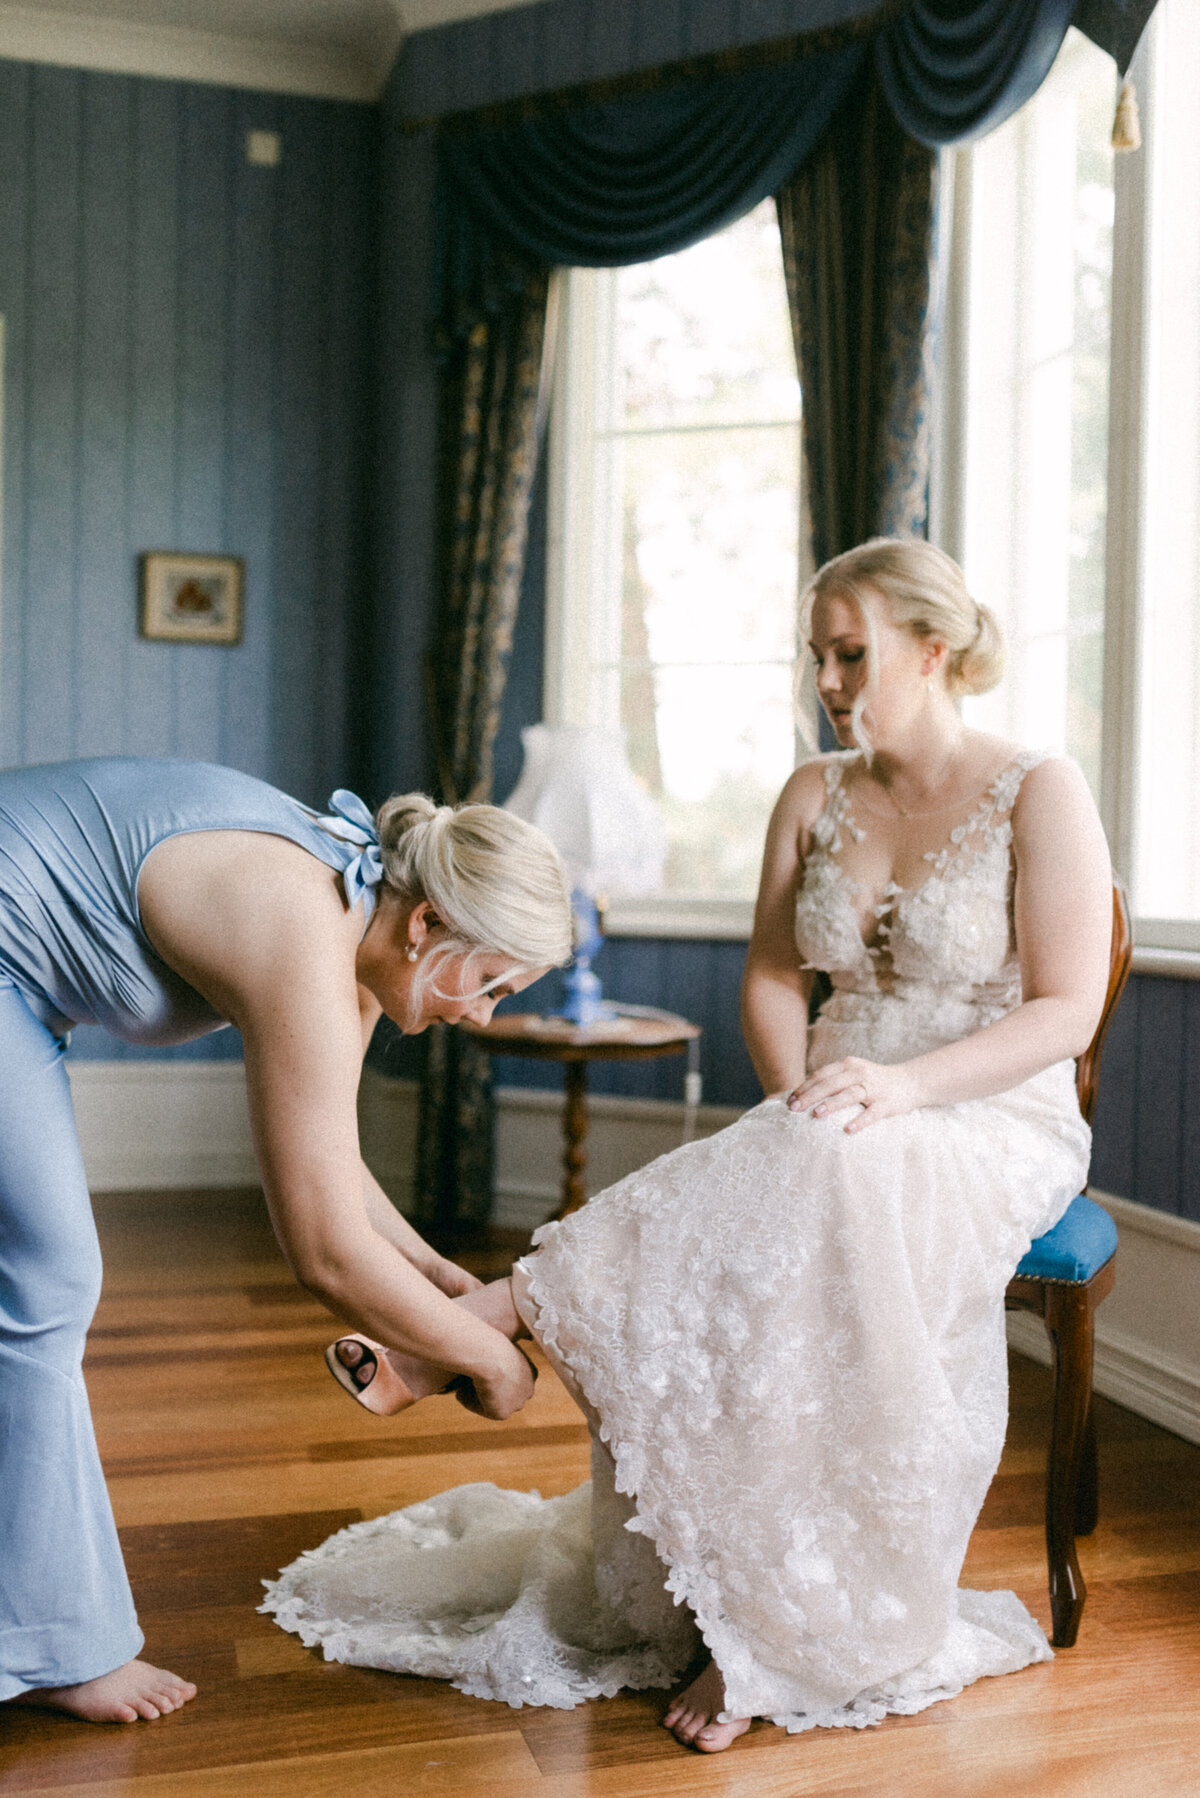 Bridesmaids helping the bride t get ready in an image photographed by wedding photographer Hannika Gabrielsson.